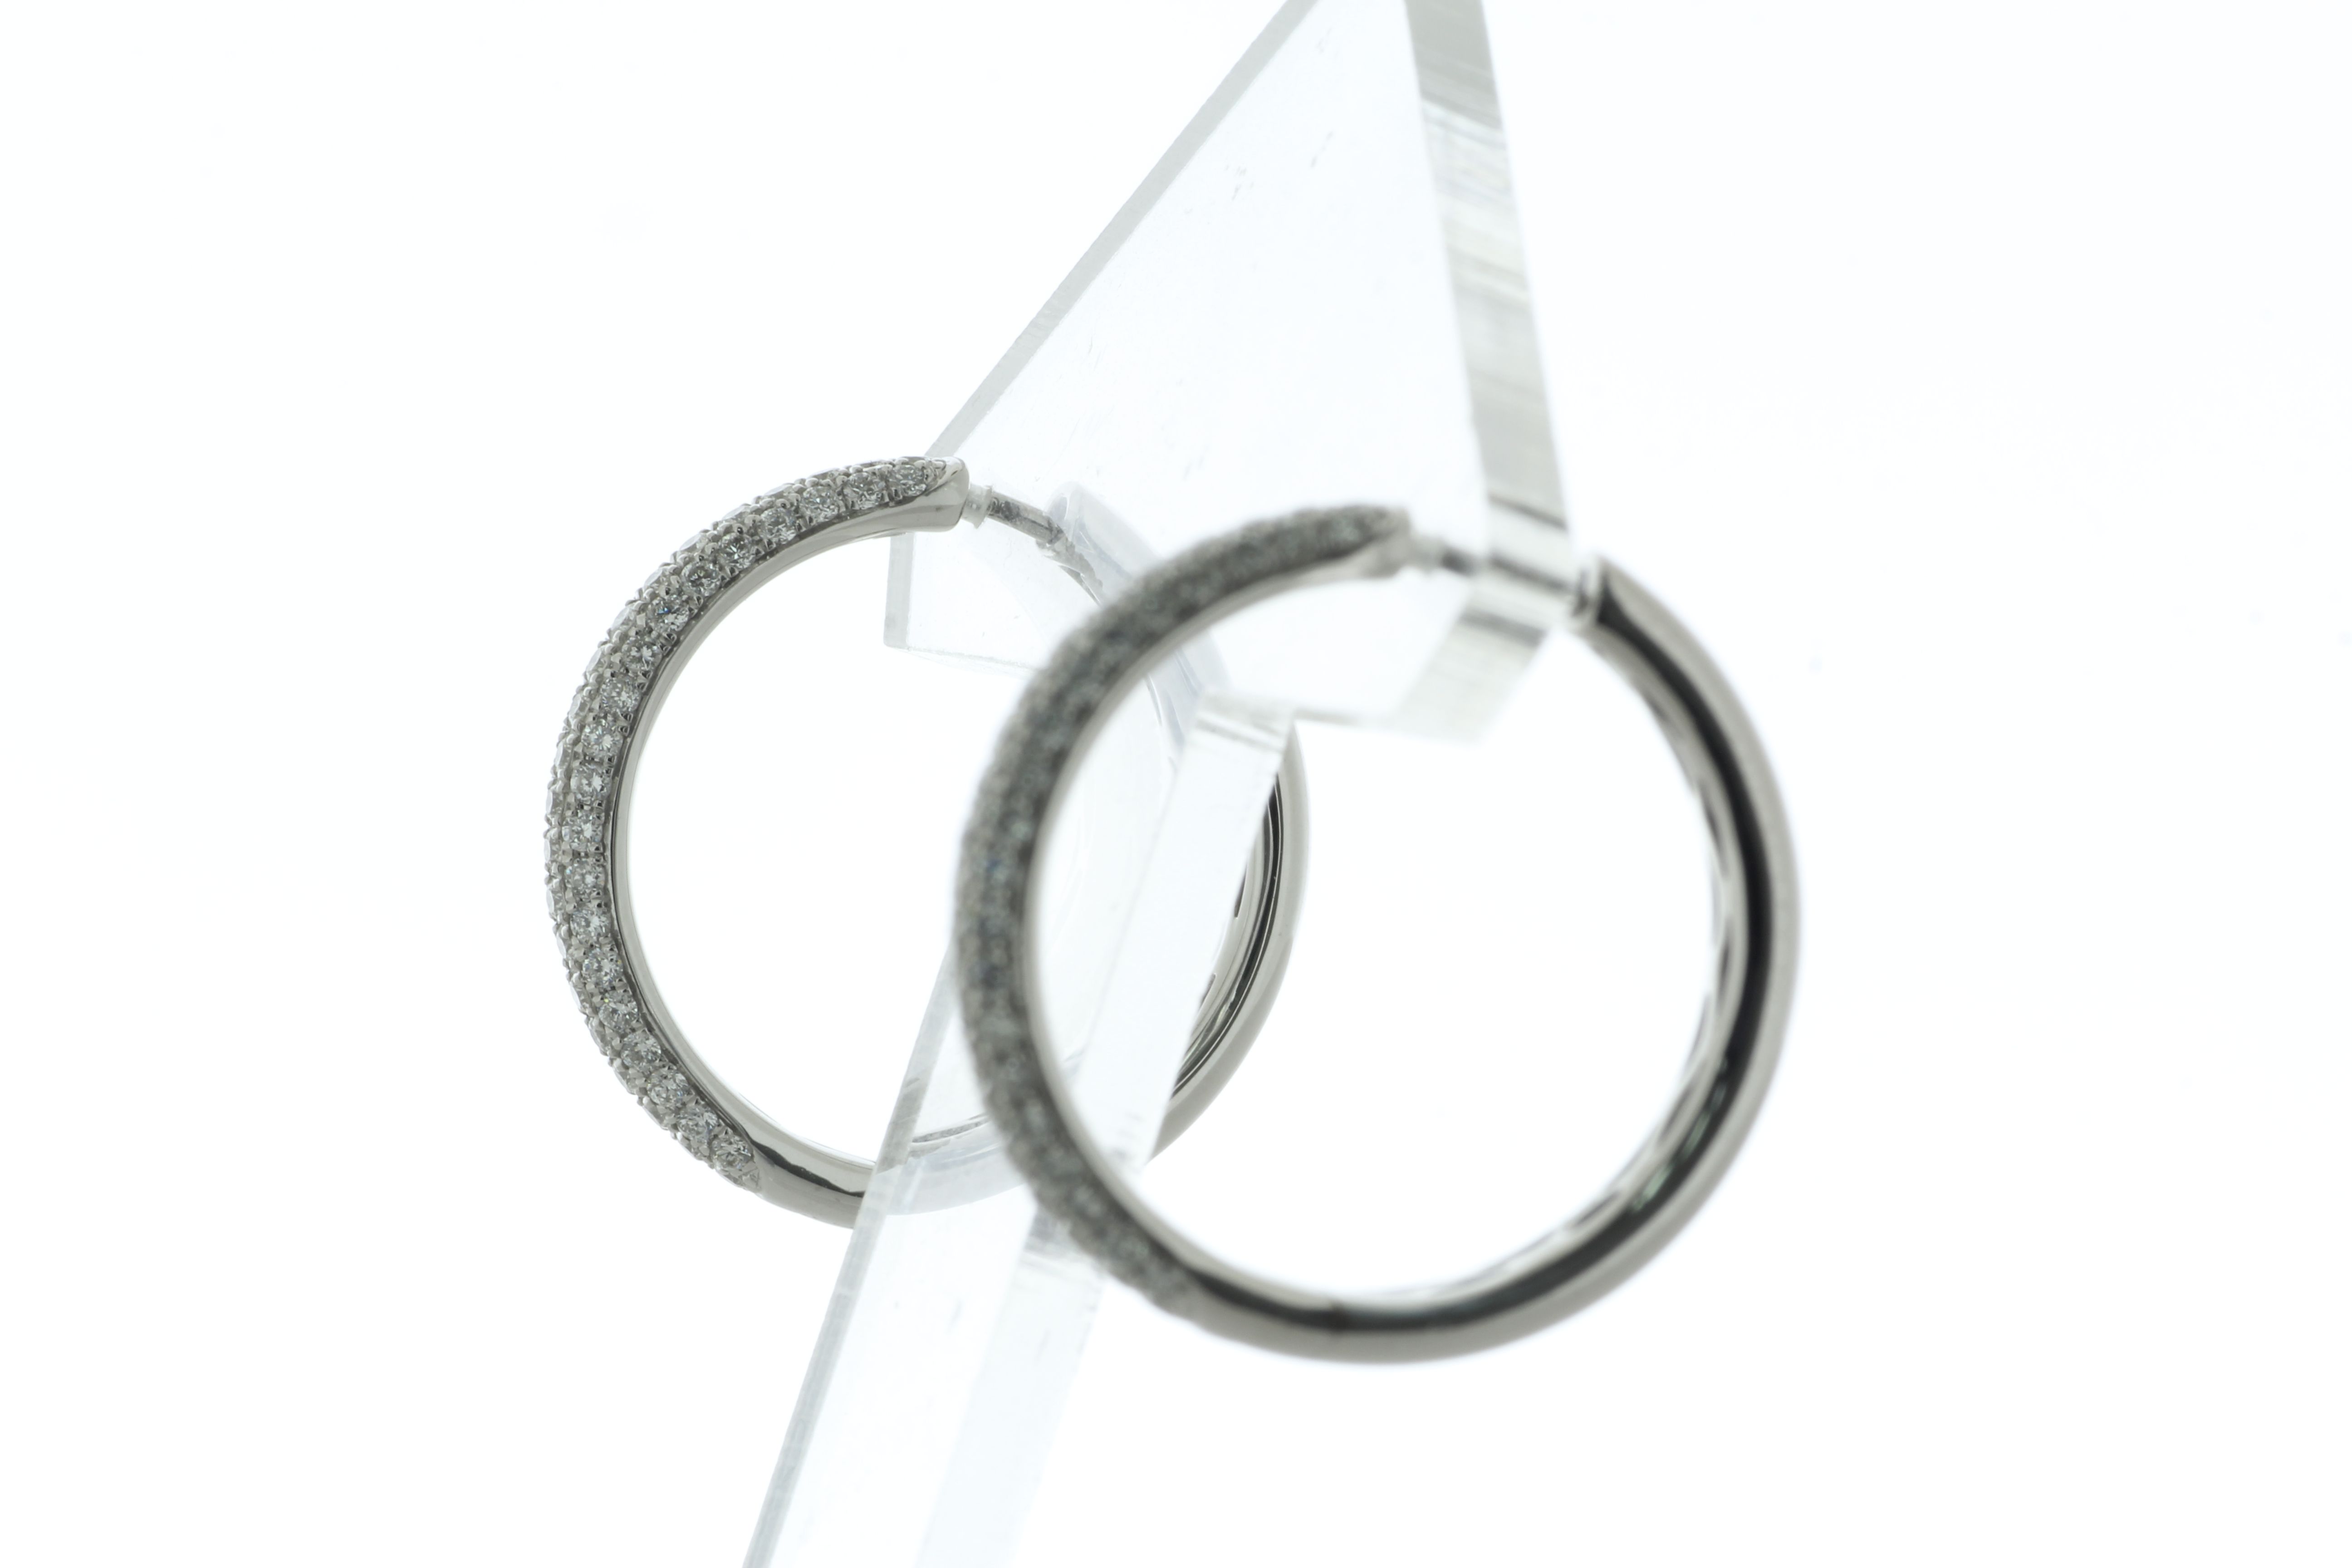 18ct White Gold Claw Set Hoop Diamond Earring 0.97 Carats - Image 2 of 4